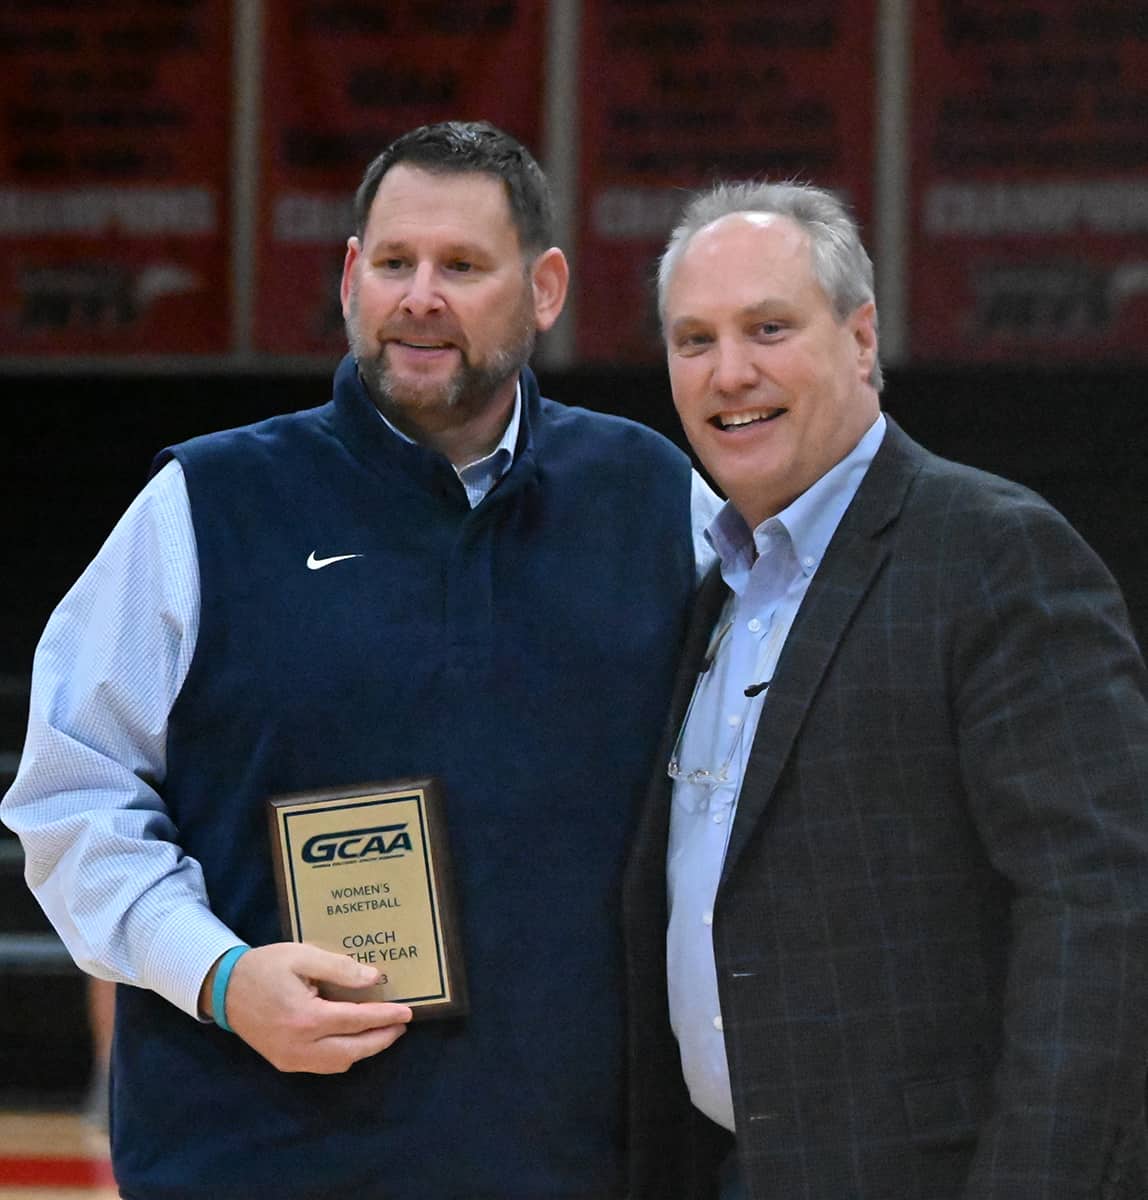 GCAA Commissioner David Elder (right) is shown above presenting SGTC Lady Jets head coach James Frey with the Coach of the Year plaque.